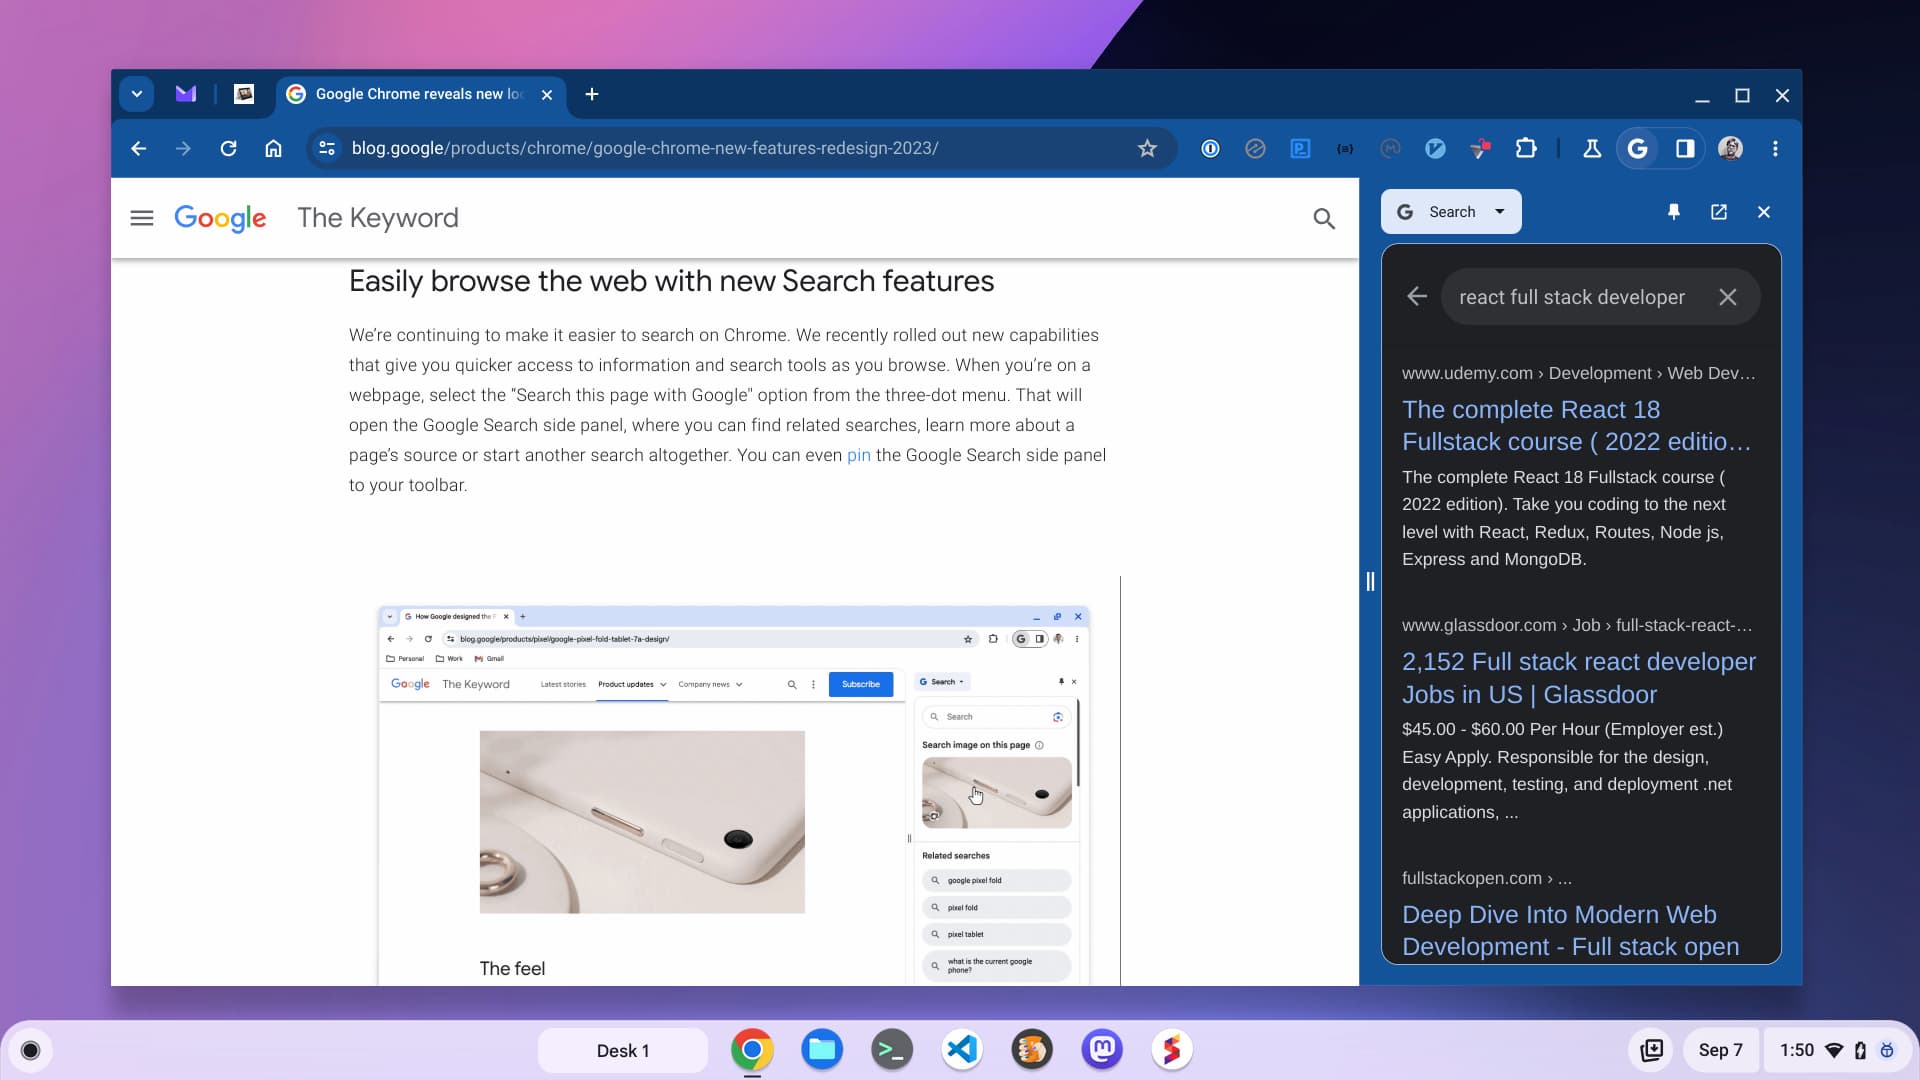 The Google Chrome 117 release brings Material You to the desktop